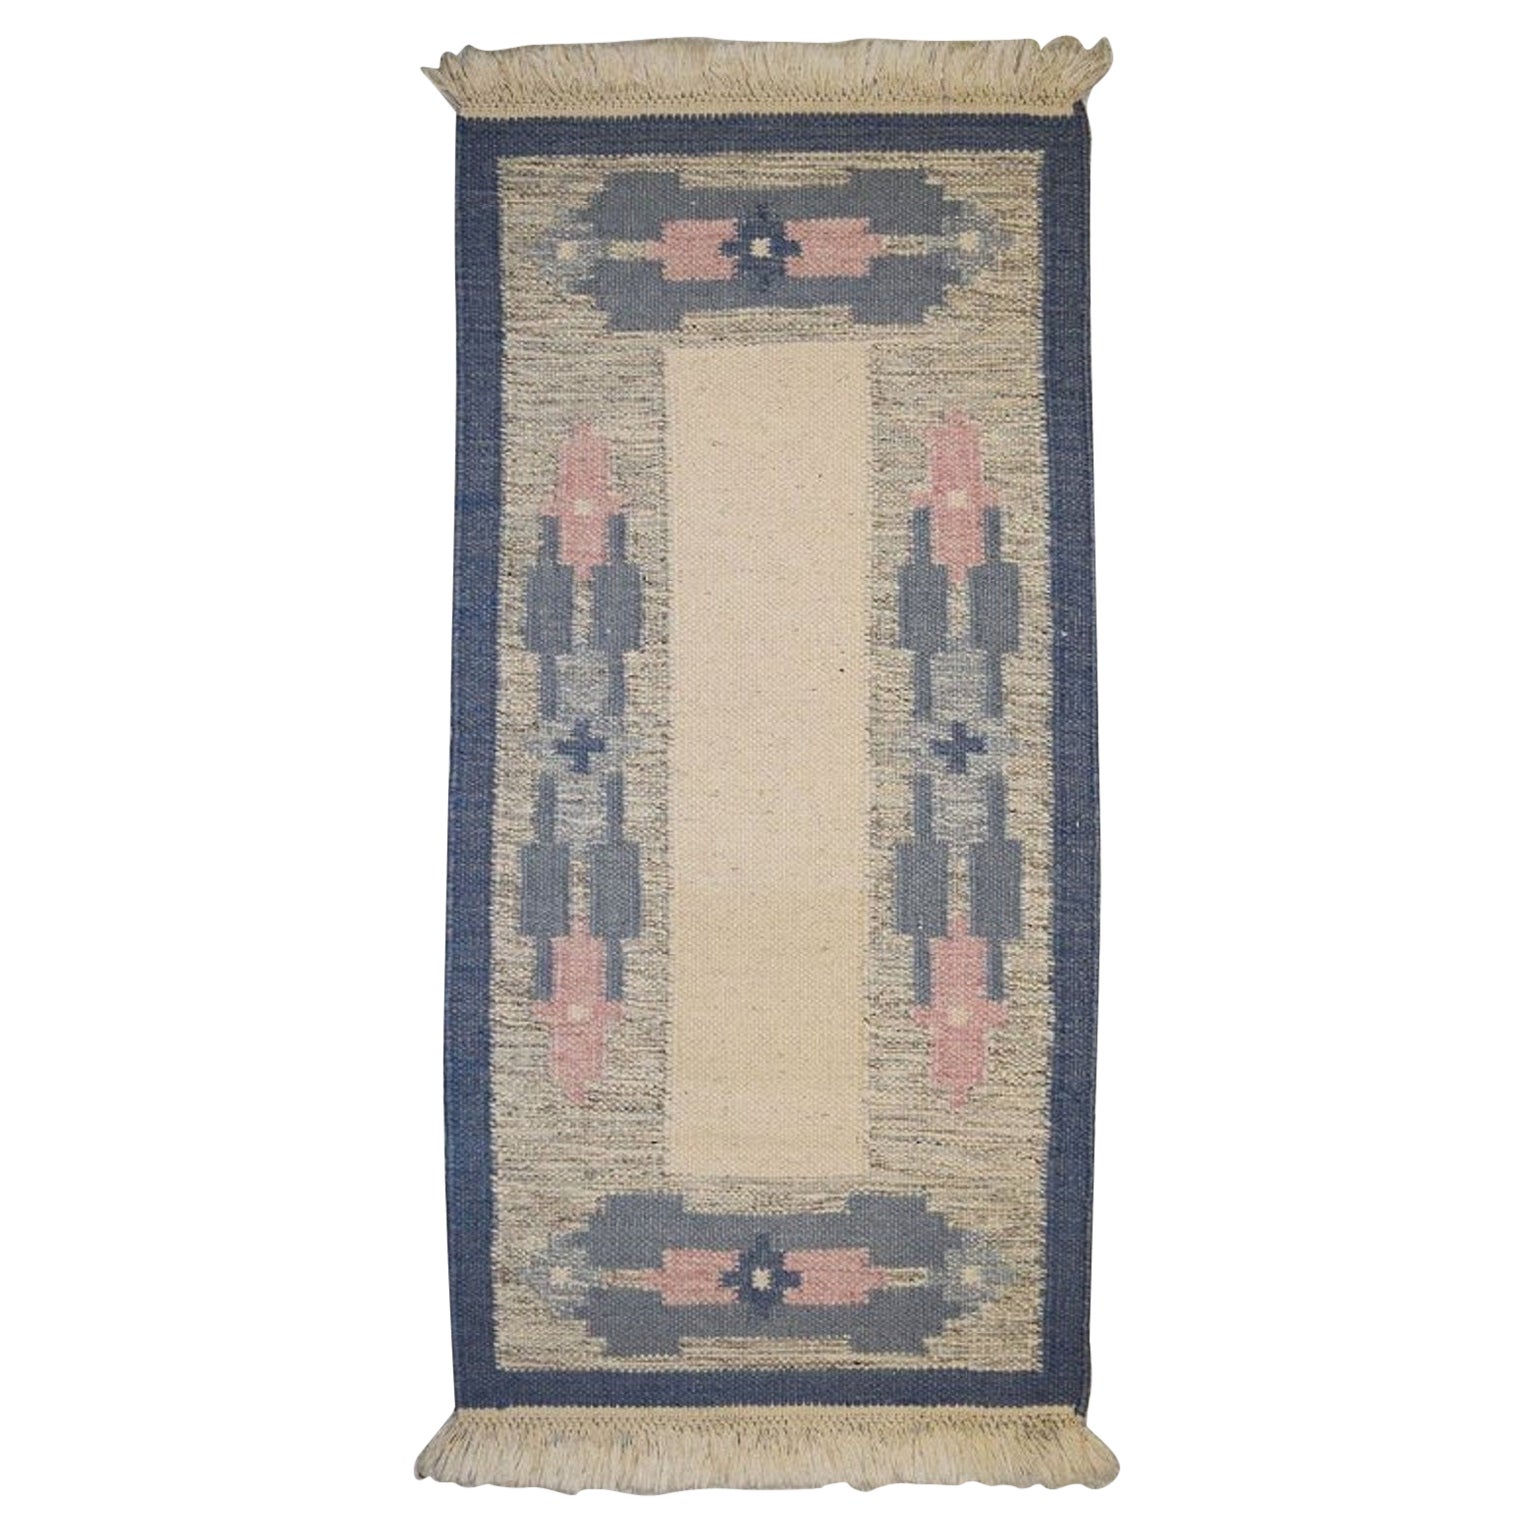 Swedish Rölakan Handwoven Wool Rug with Fringes, 1960s For Sale